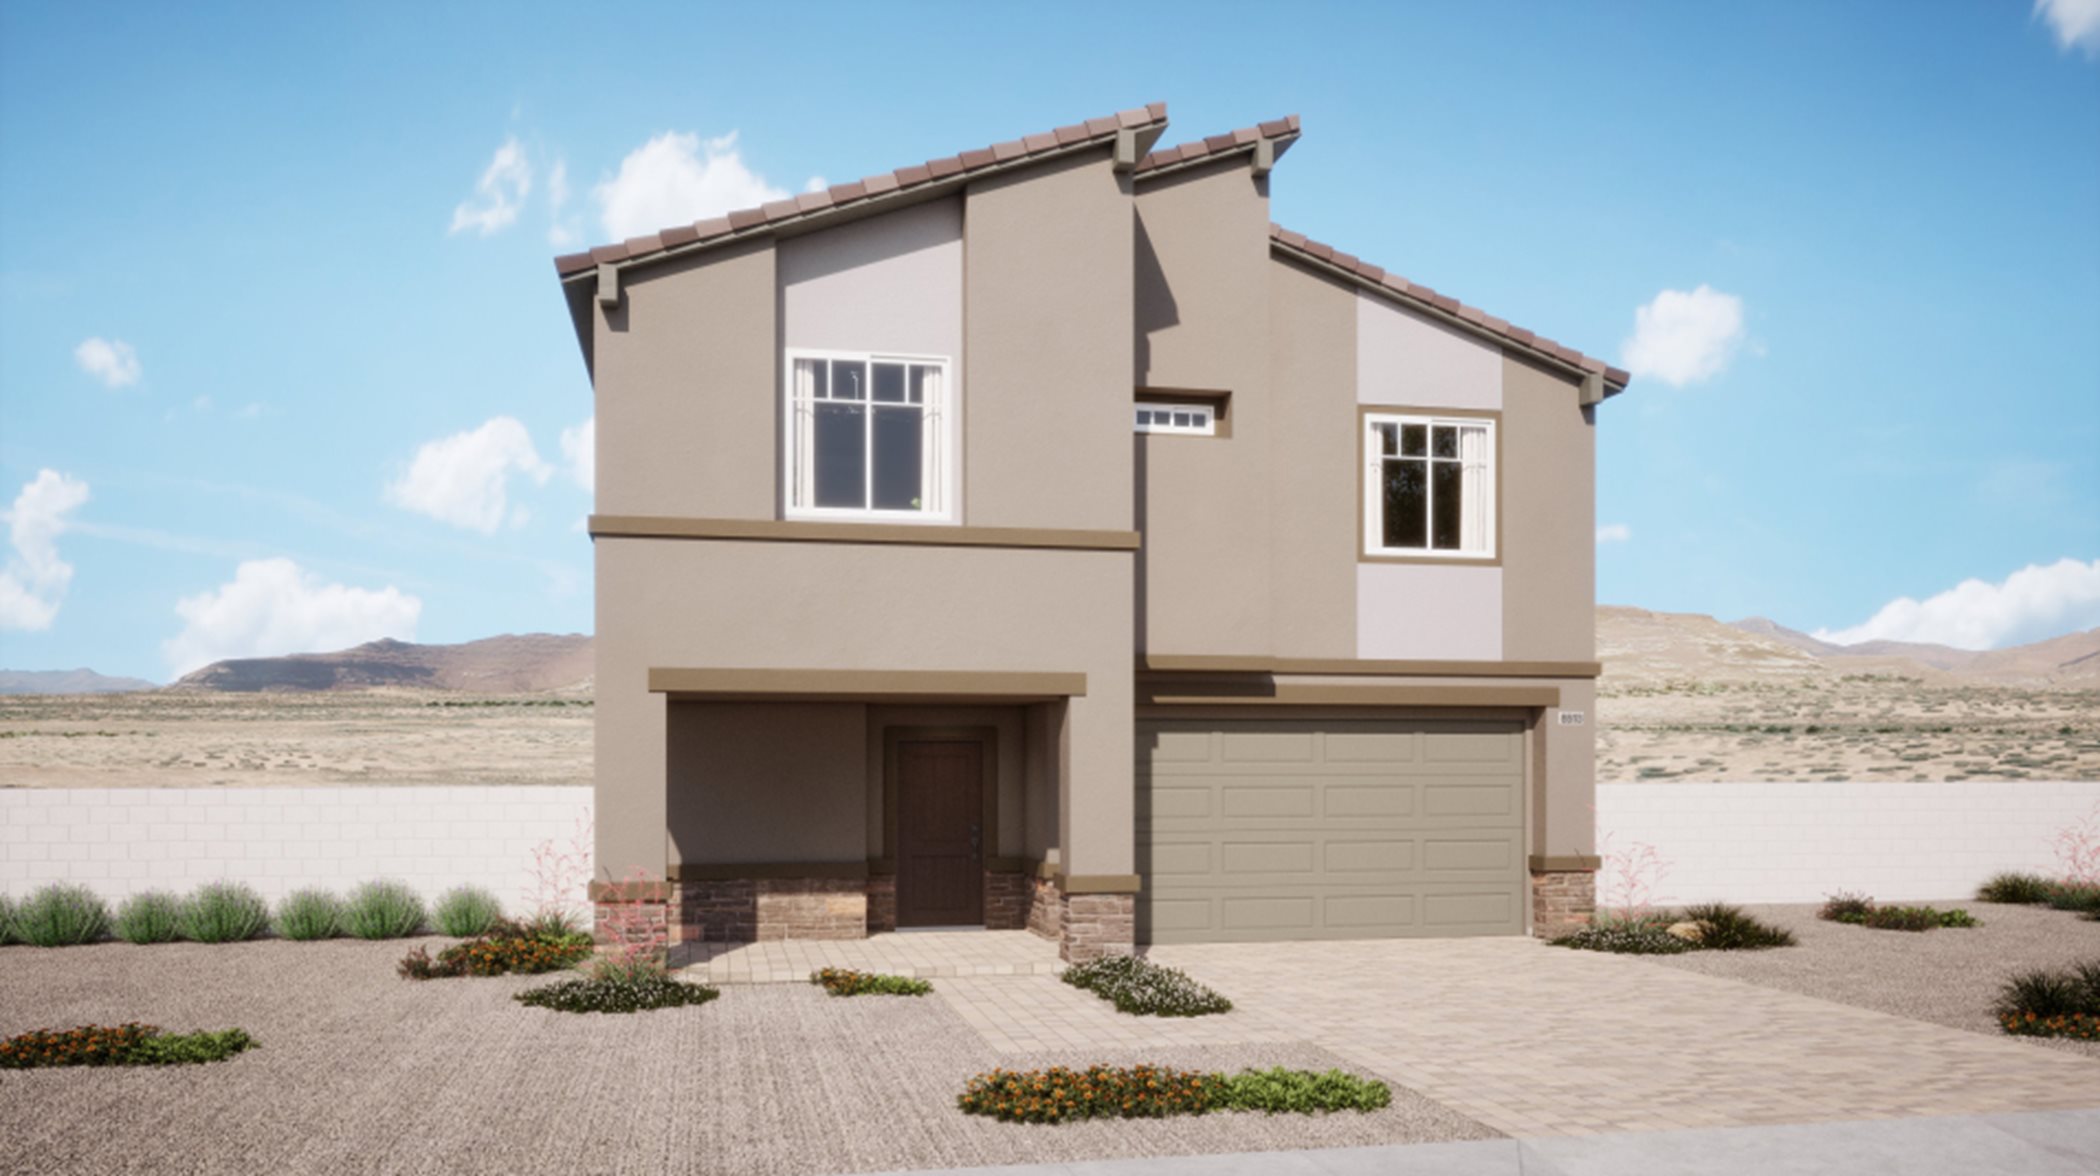 Exterior A home rendering